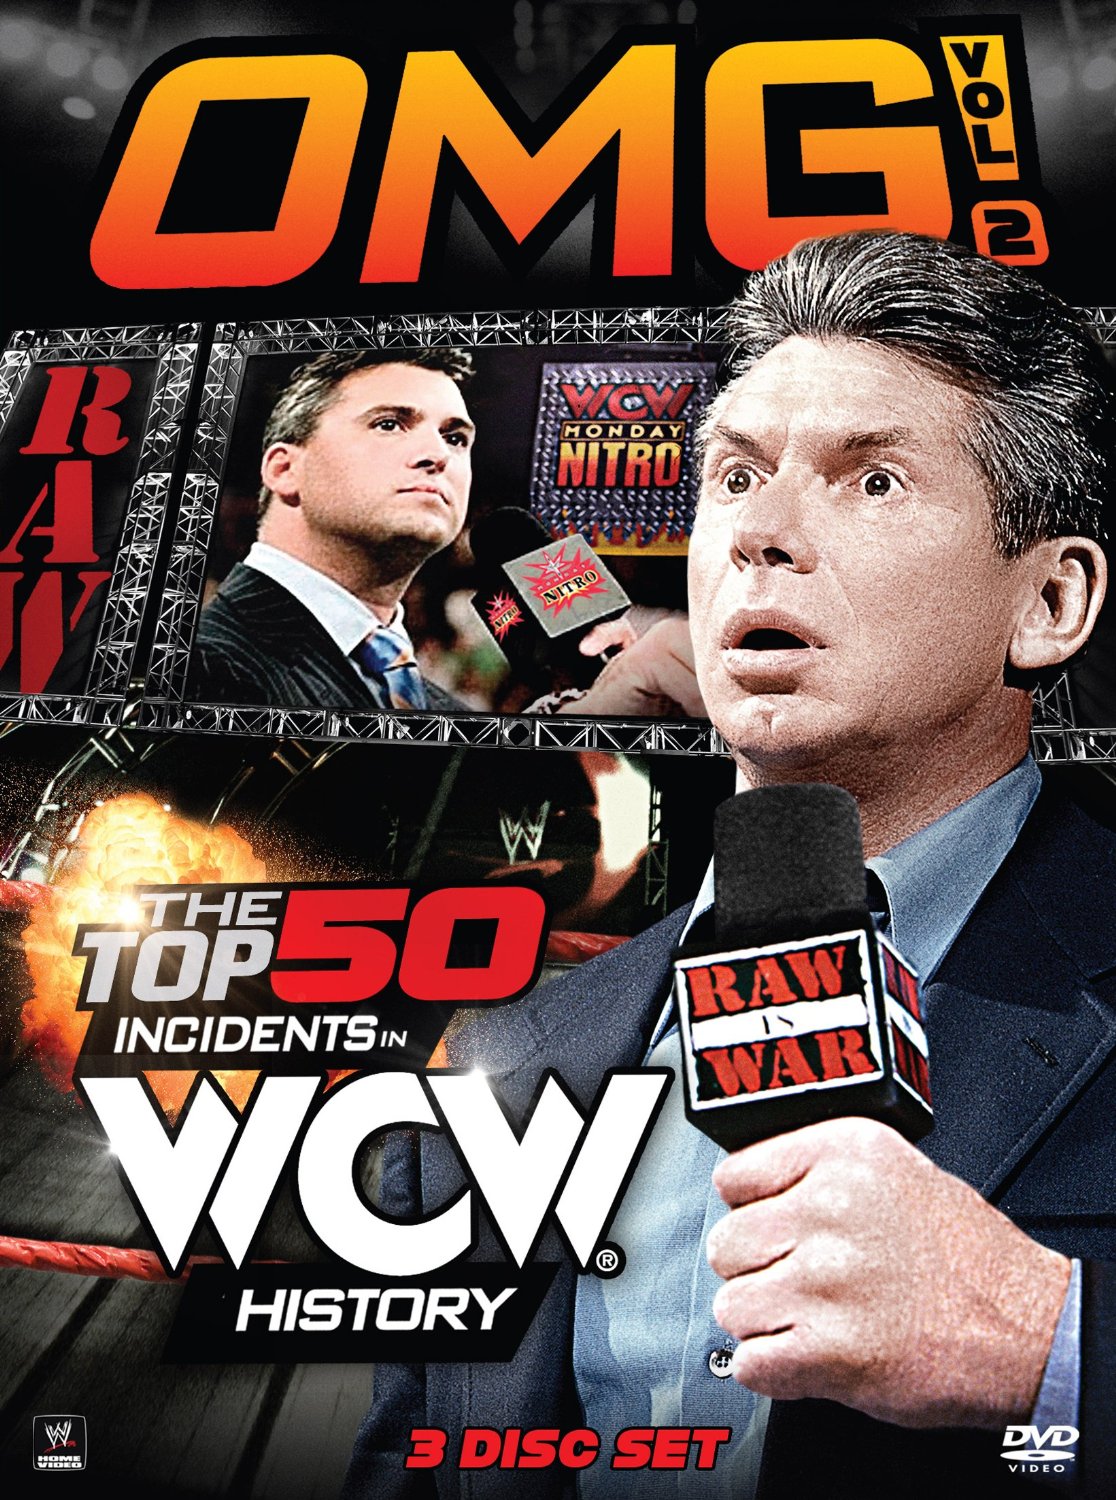 WWE OMG Top 50 Incidents in WCW History Volume 2 DVD cover Vince McMahon Shane McMahon